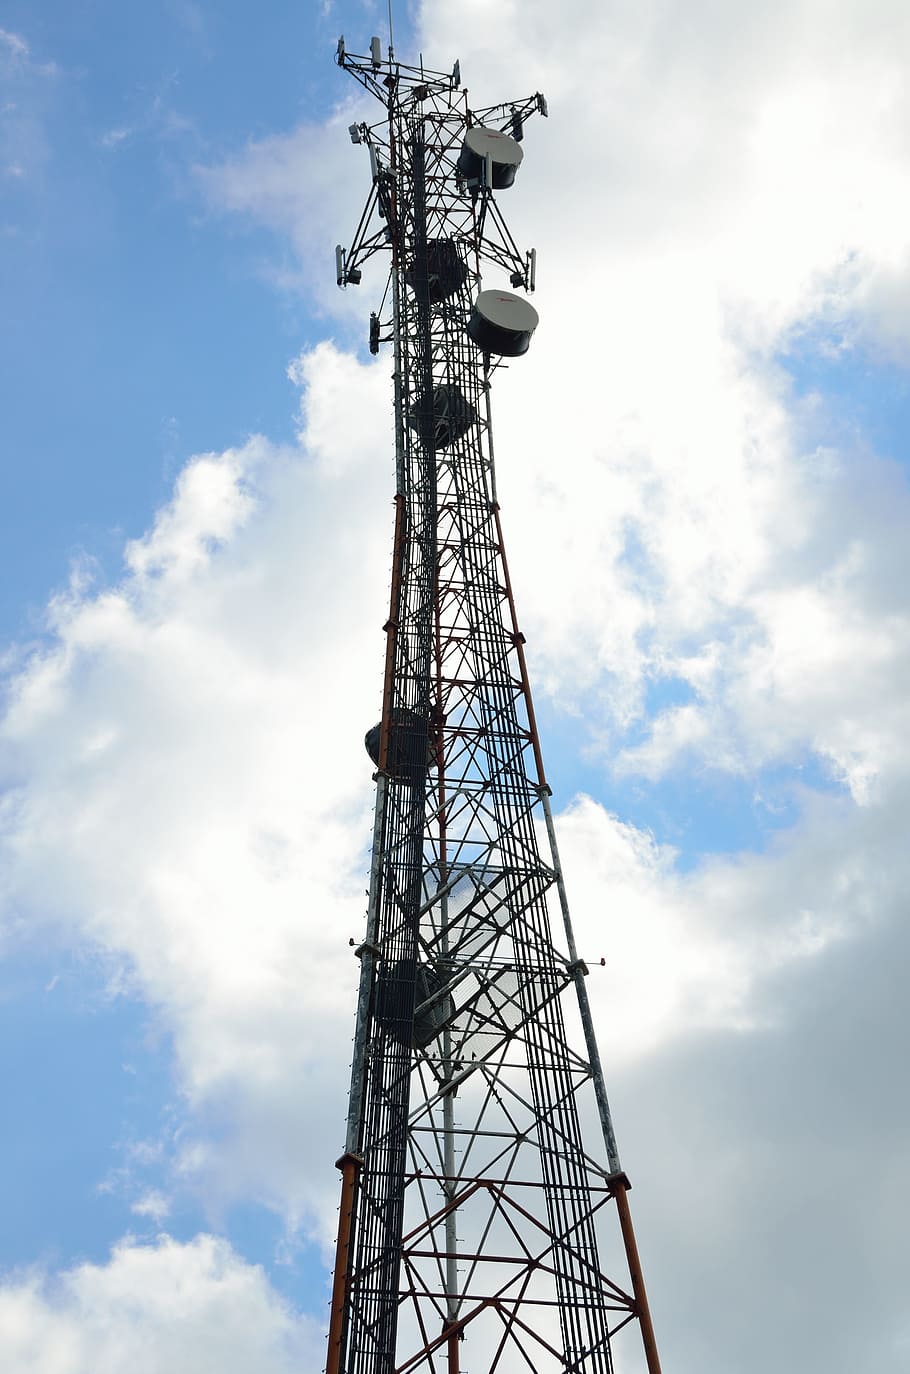 Microwave Tower, Communication, Tower, communication, tower, microwave, radio, antenna, mobile, telecommunication, technology